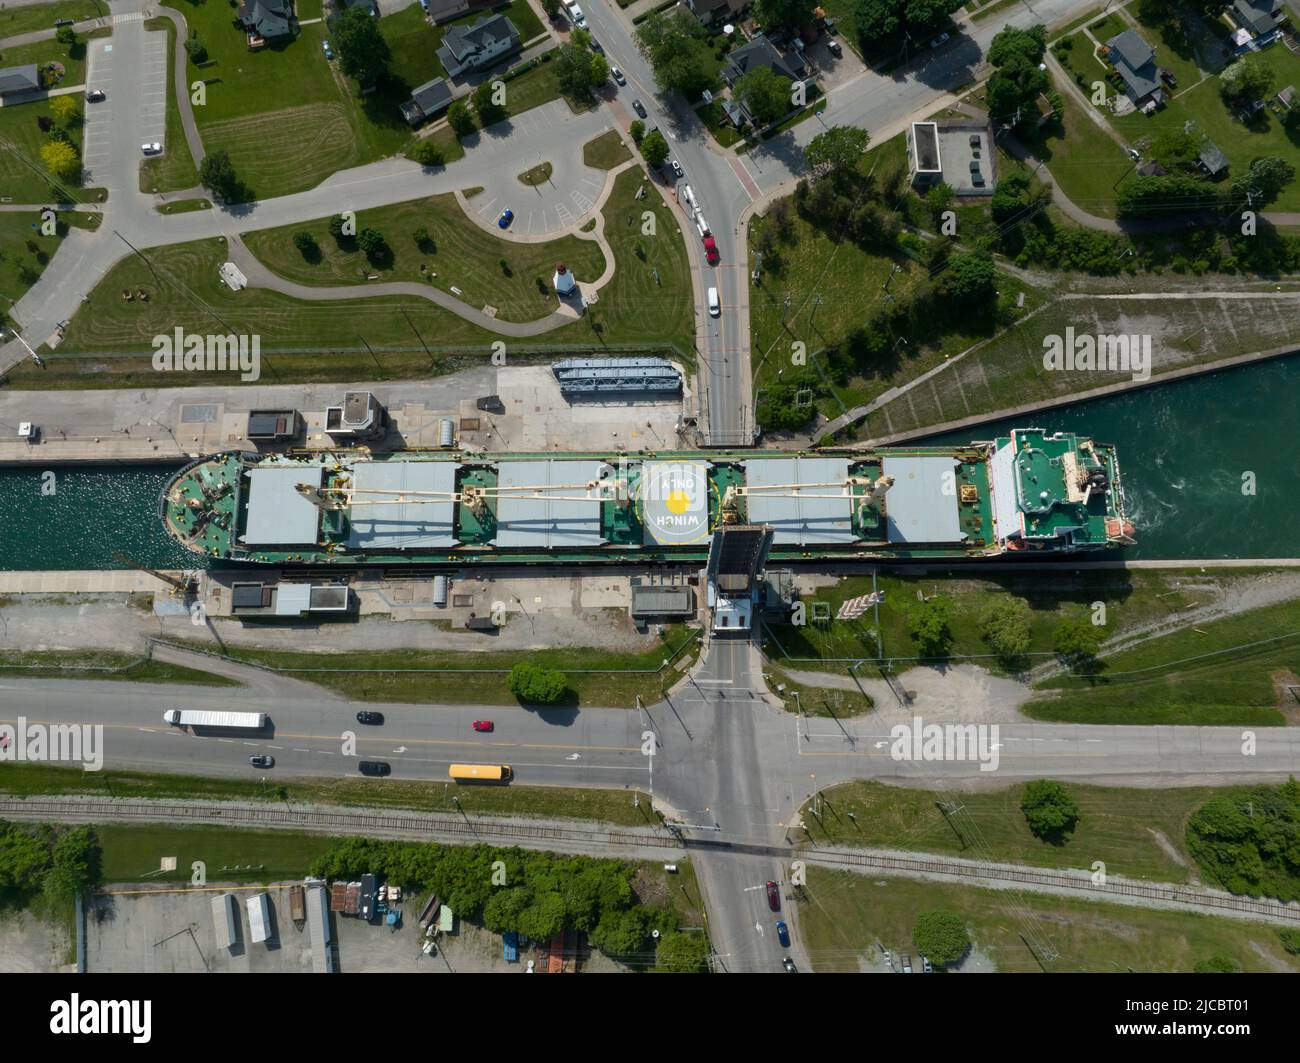 A direct overhead, top-down aerial view of a bulk carrier cargo ship passing through a tight urban canal at a drawbridge crossing during the day. Stock Photo